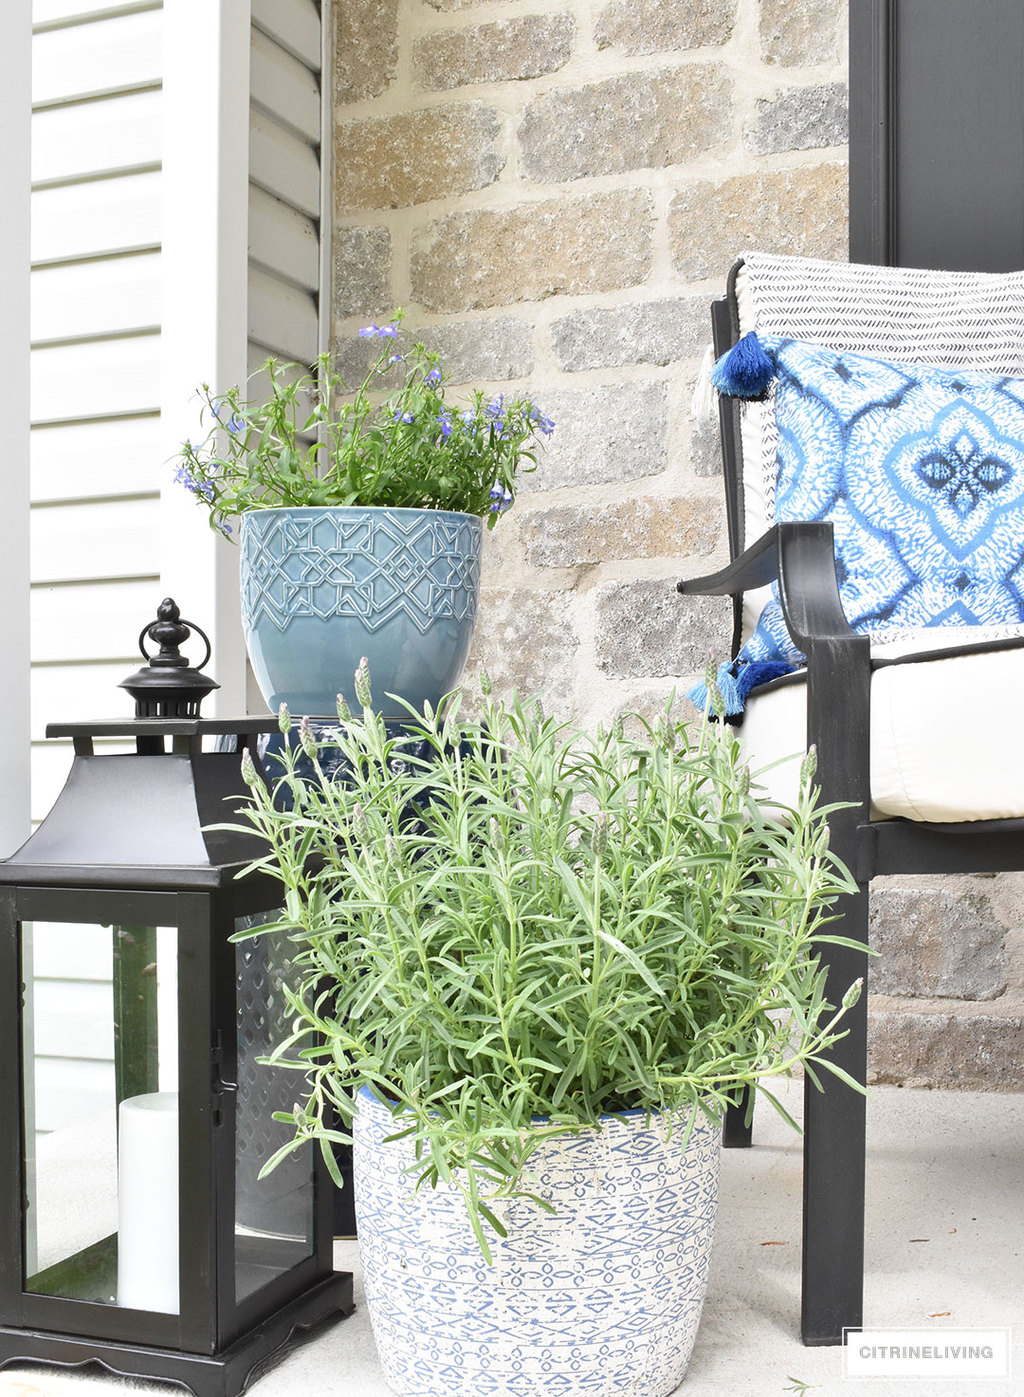 Create a chic Spring porch decorated with blue and white accents: garden stools, potted plants with some boho-chic and nautical pieces thrown into the mix!